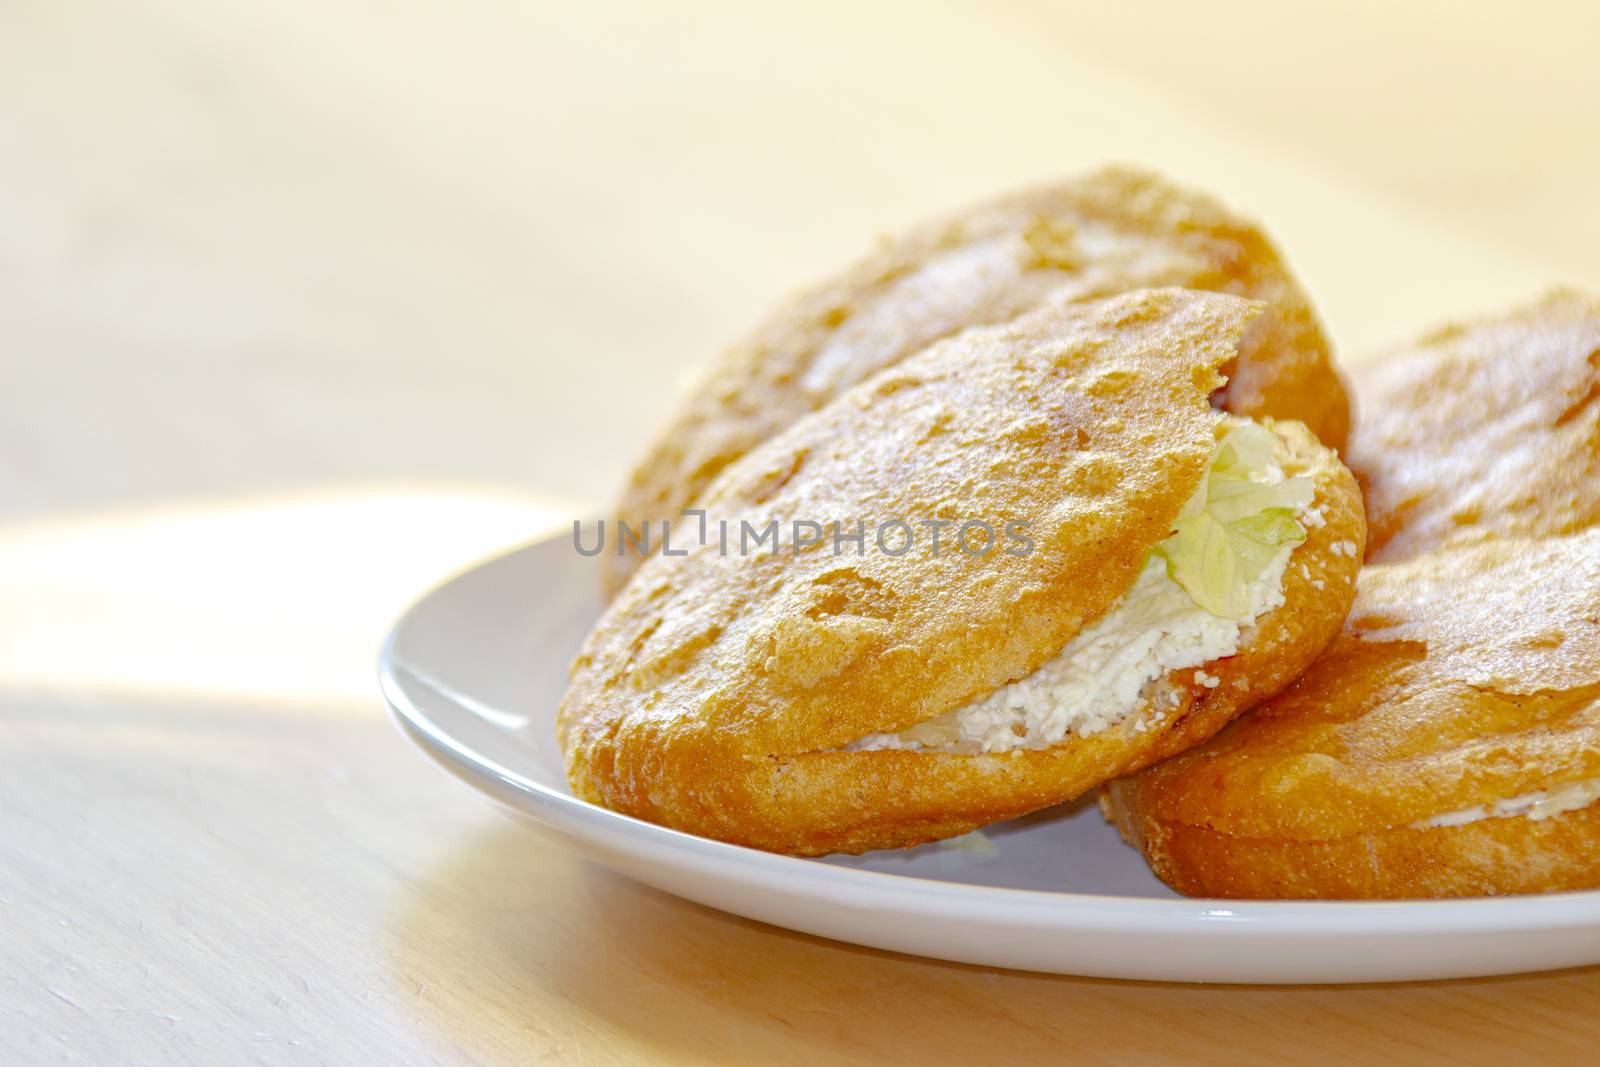 A close up of a Gordita "chubby" in Spanish is a Mexican cuisine is a pastry made with maize dough and stuffed with cheese, meat, or other fillings. by oasisamuel